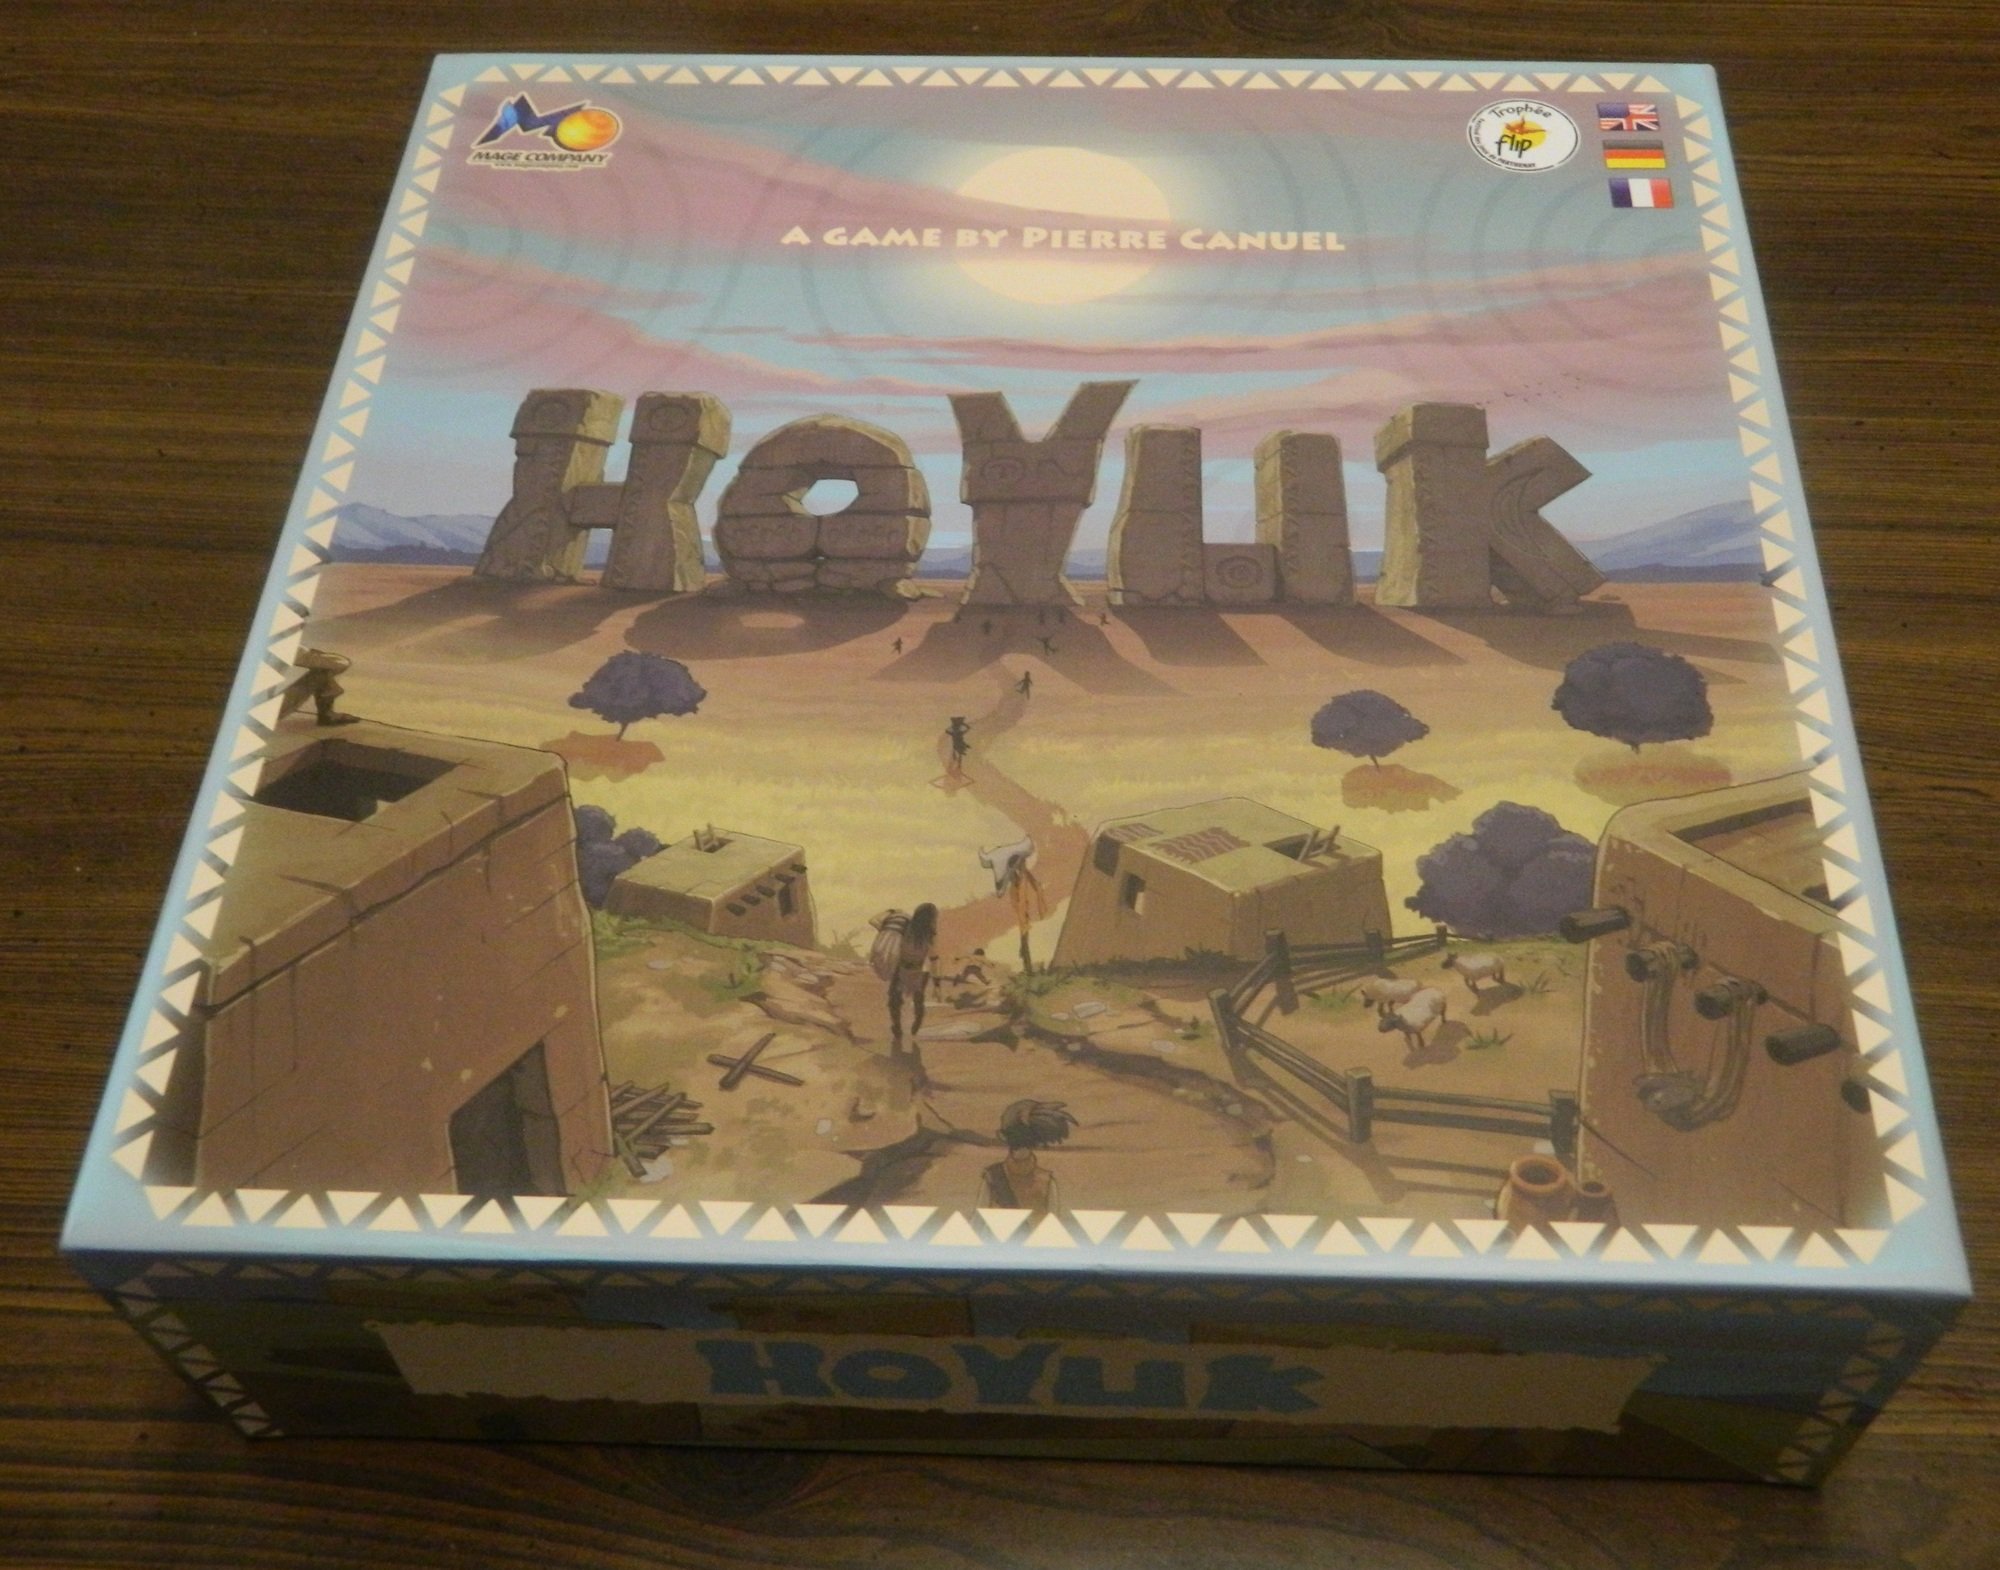 Hoyuk Board Game Review and Rules